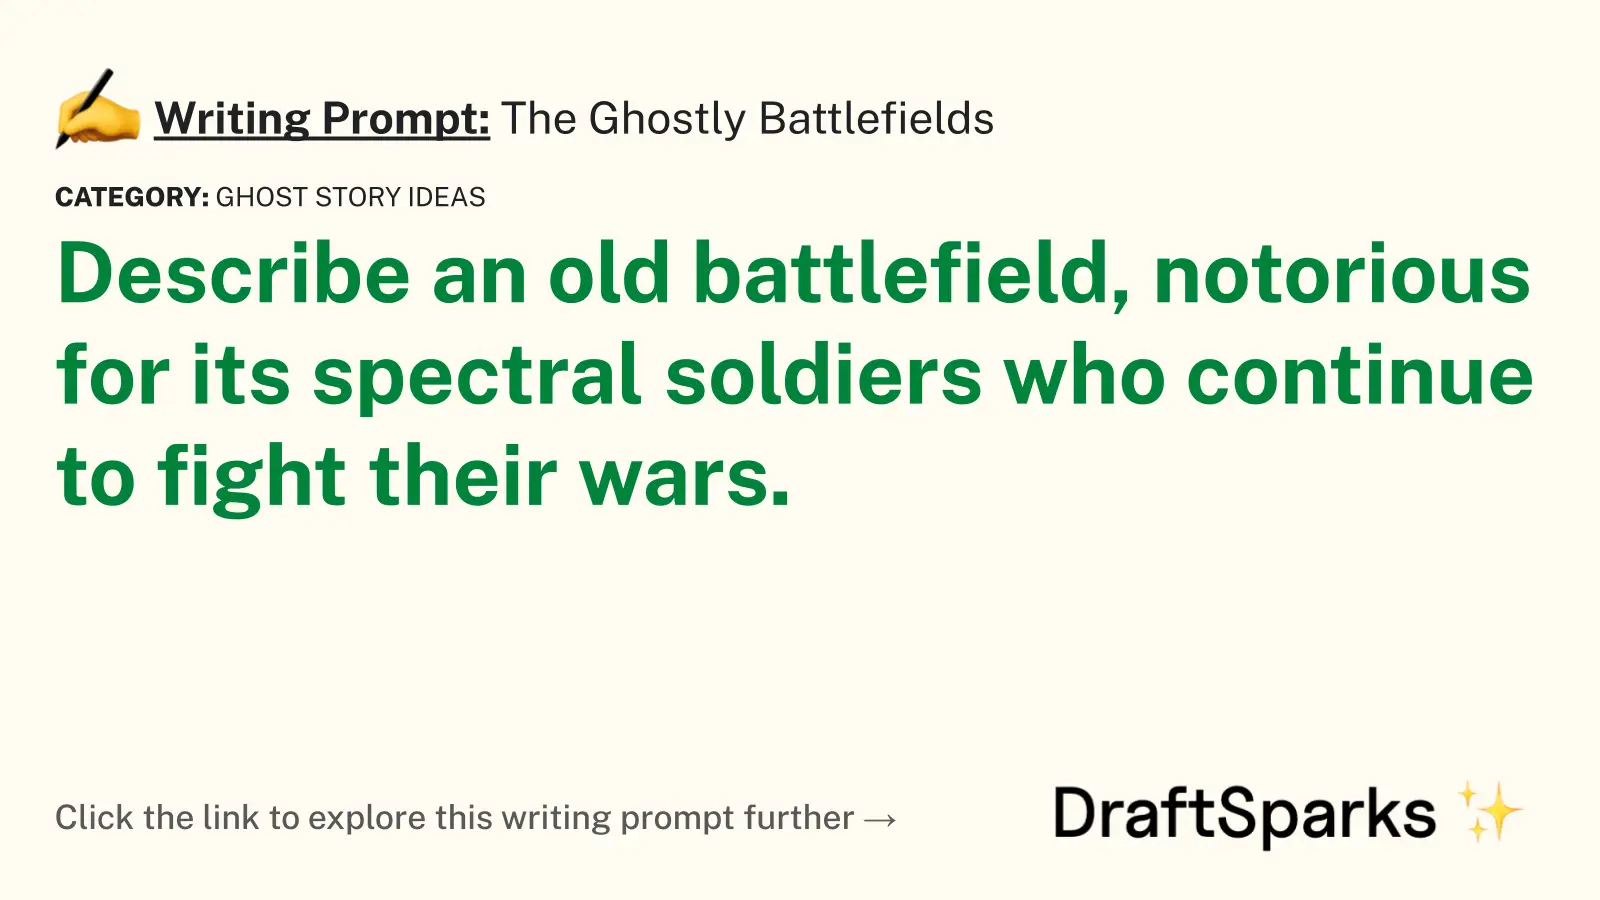 The Ghostly Battlefields